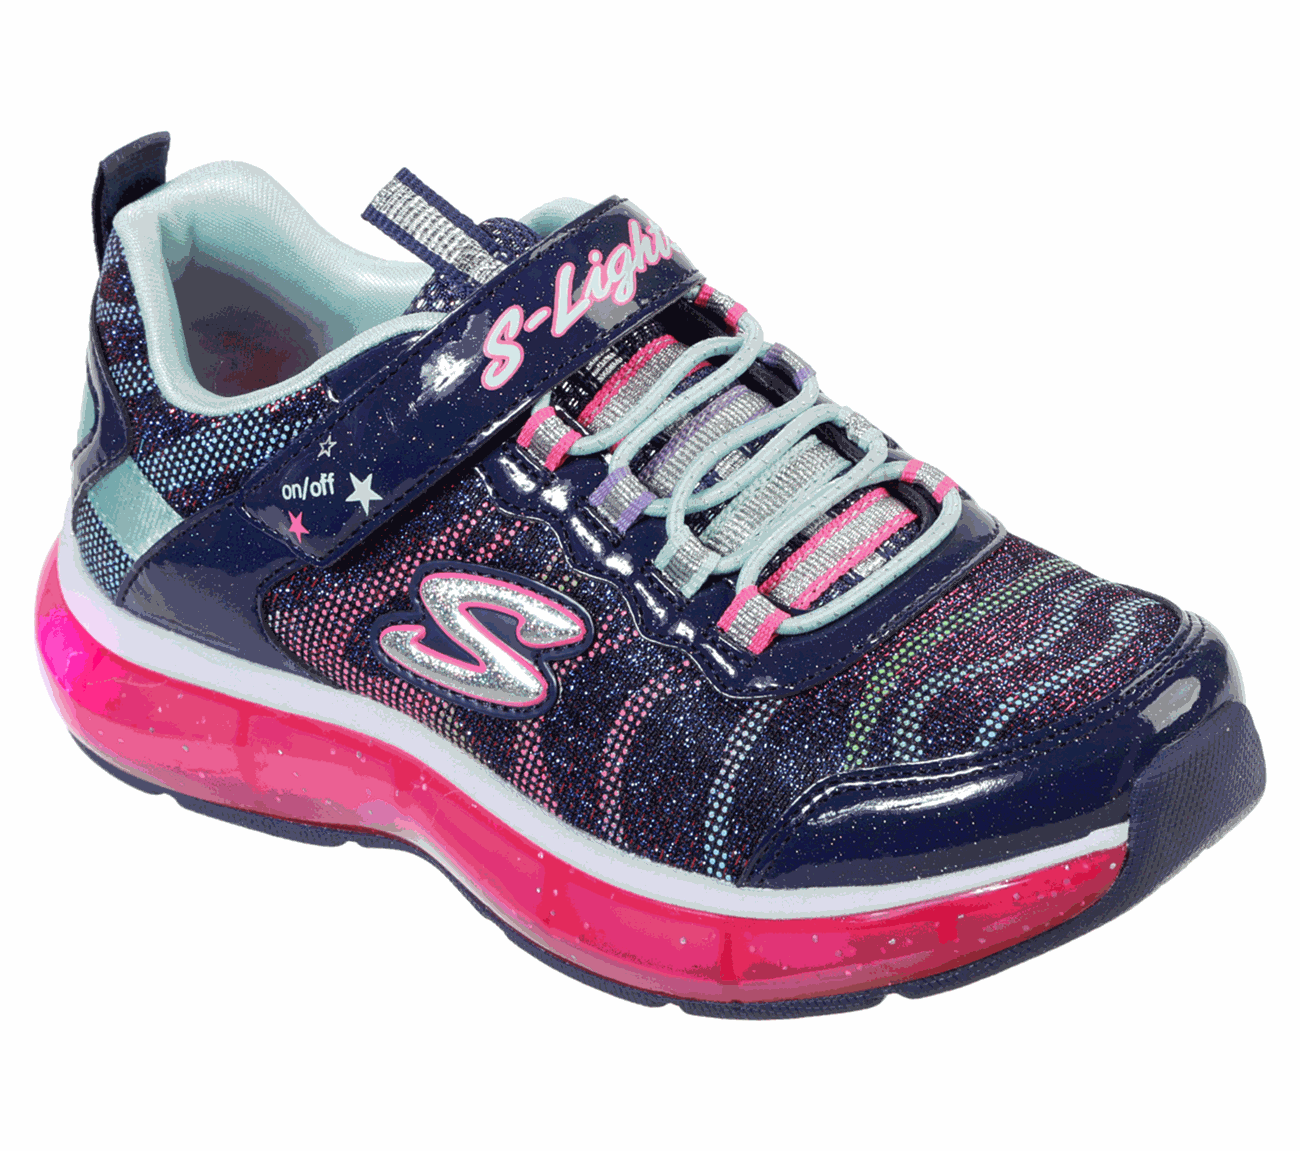 skechers light up shoes with on off switch